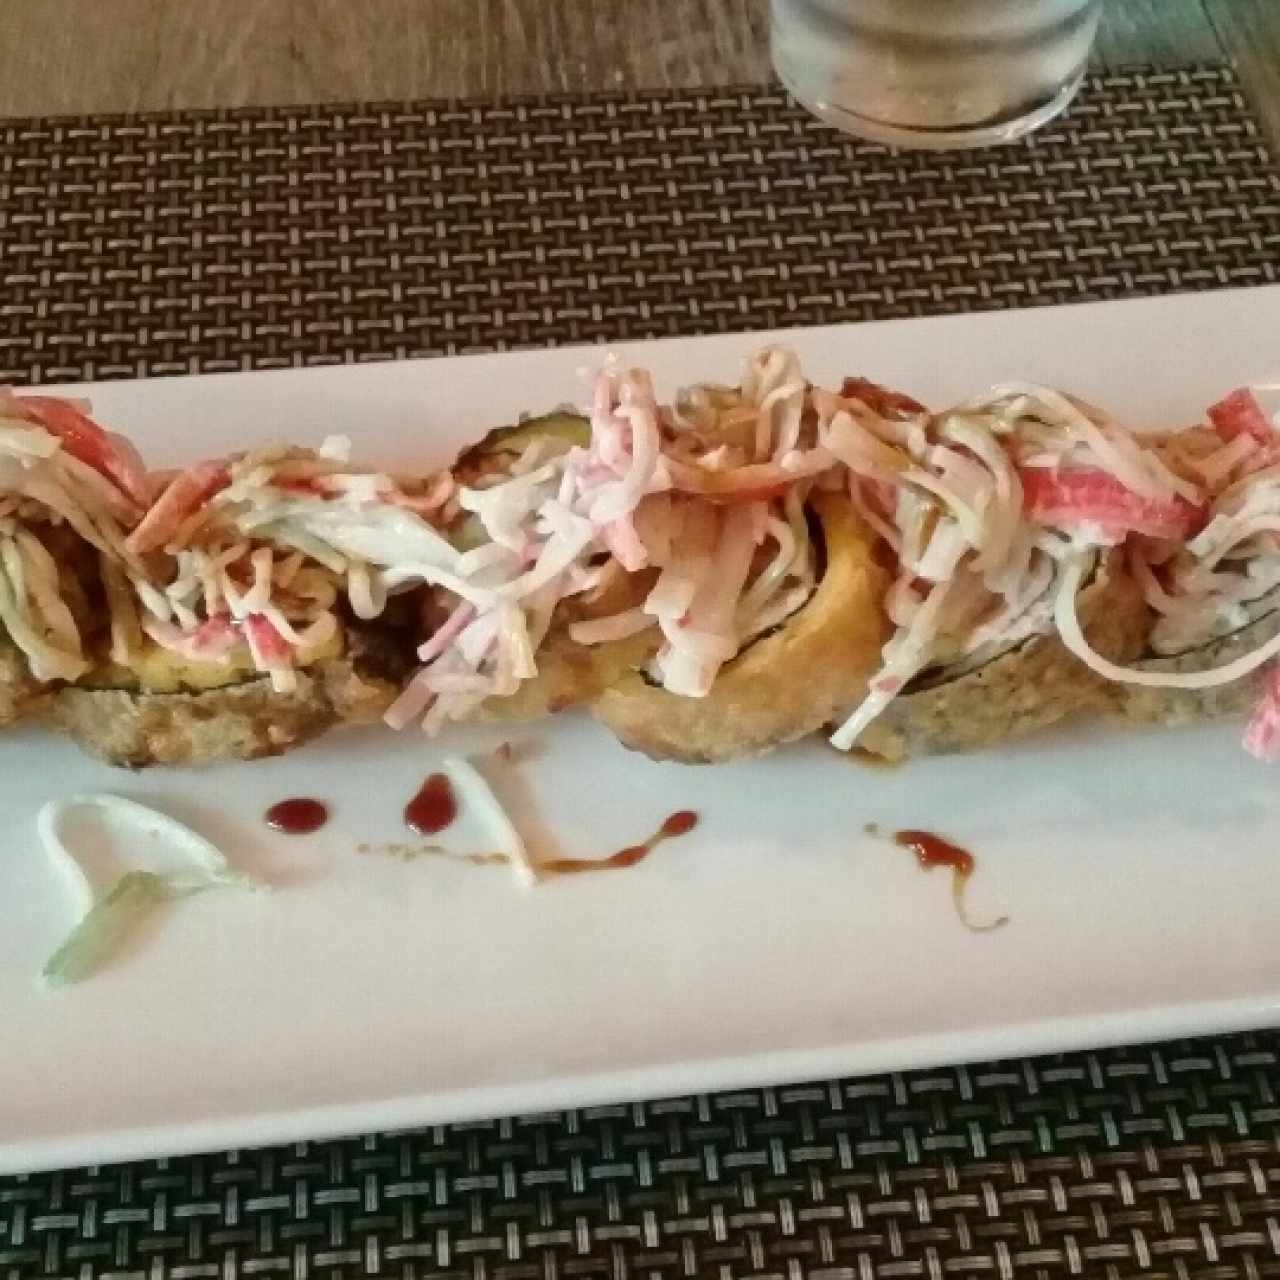 Tropical roll 😋😋😋😋😋